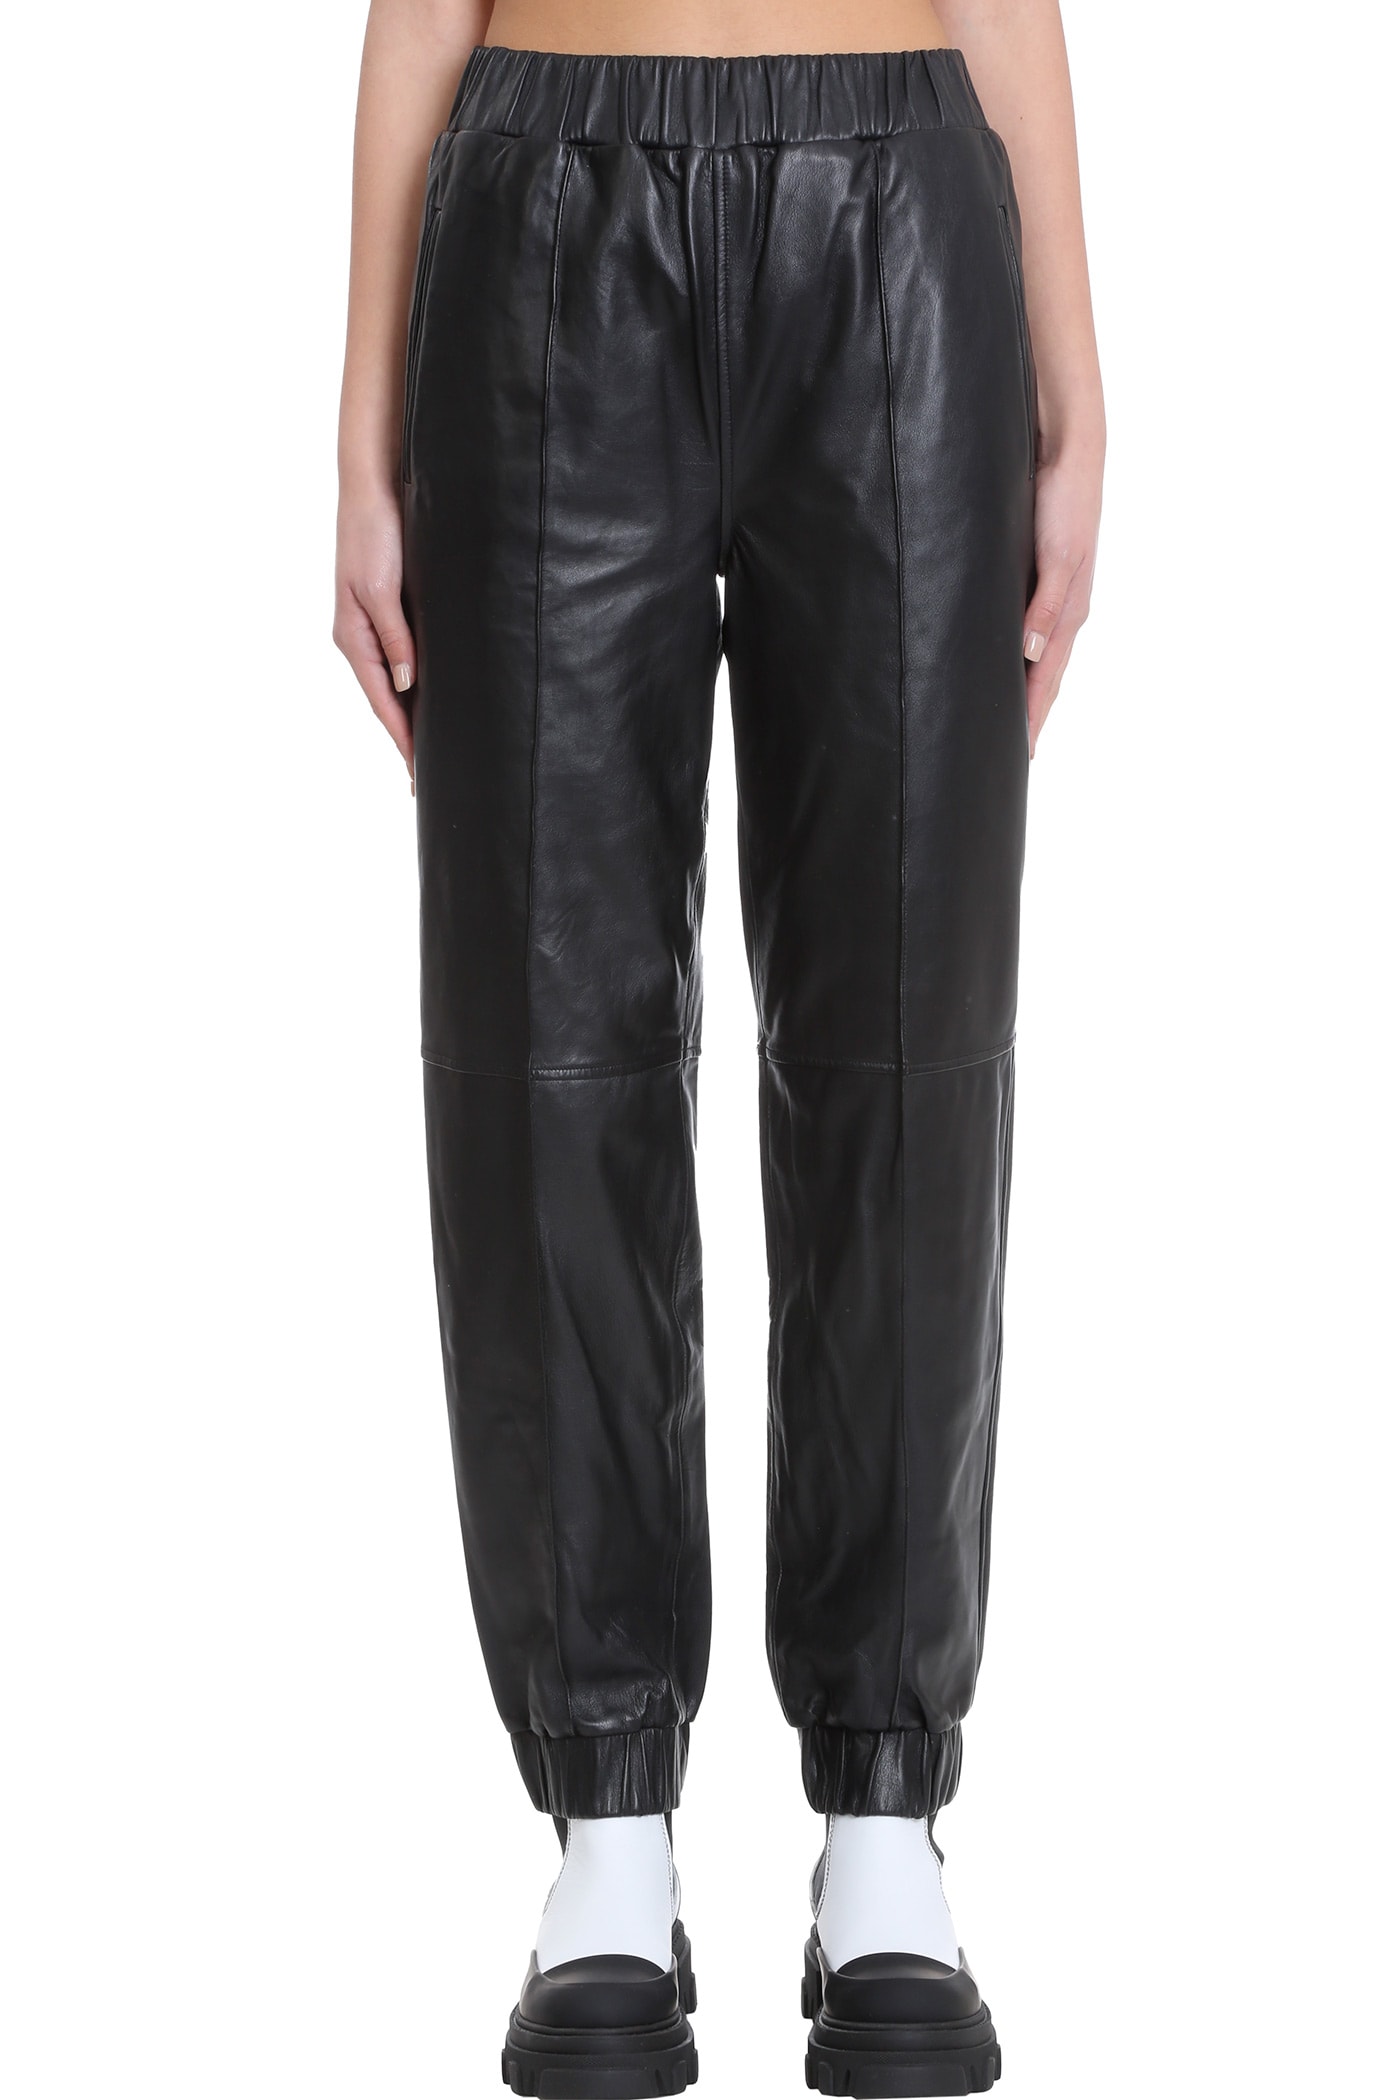 Ganni Pants In Black Leather